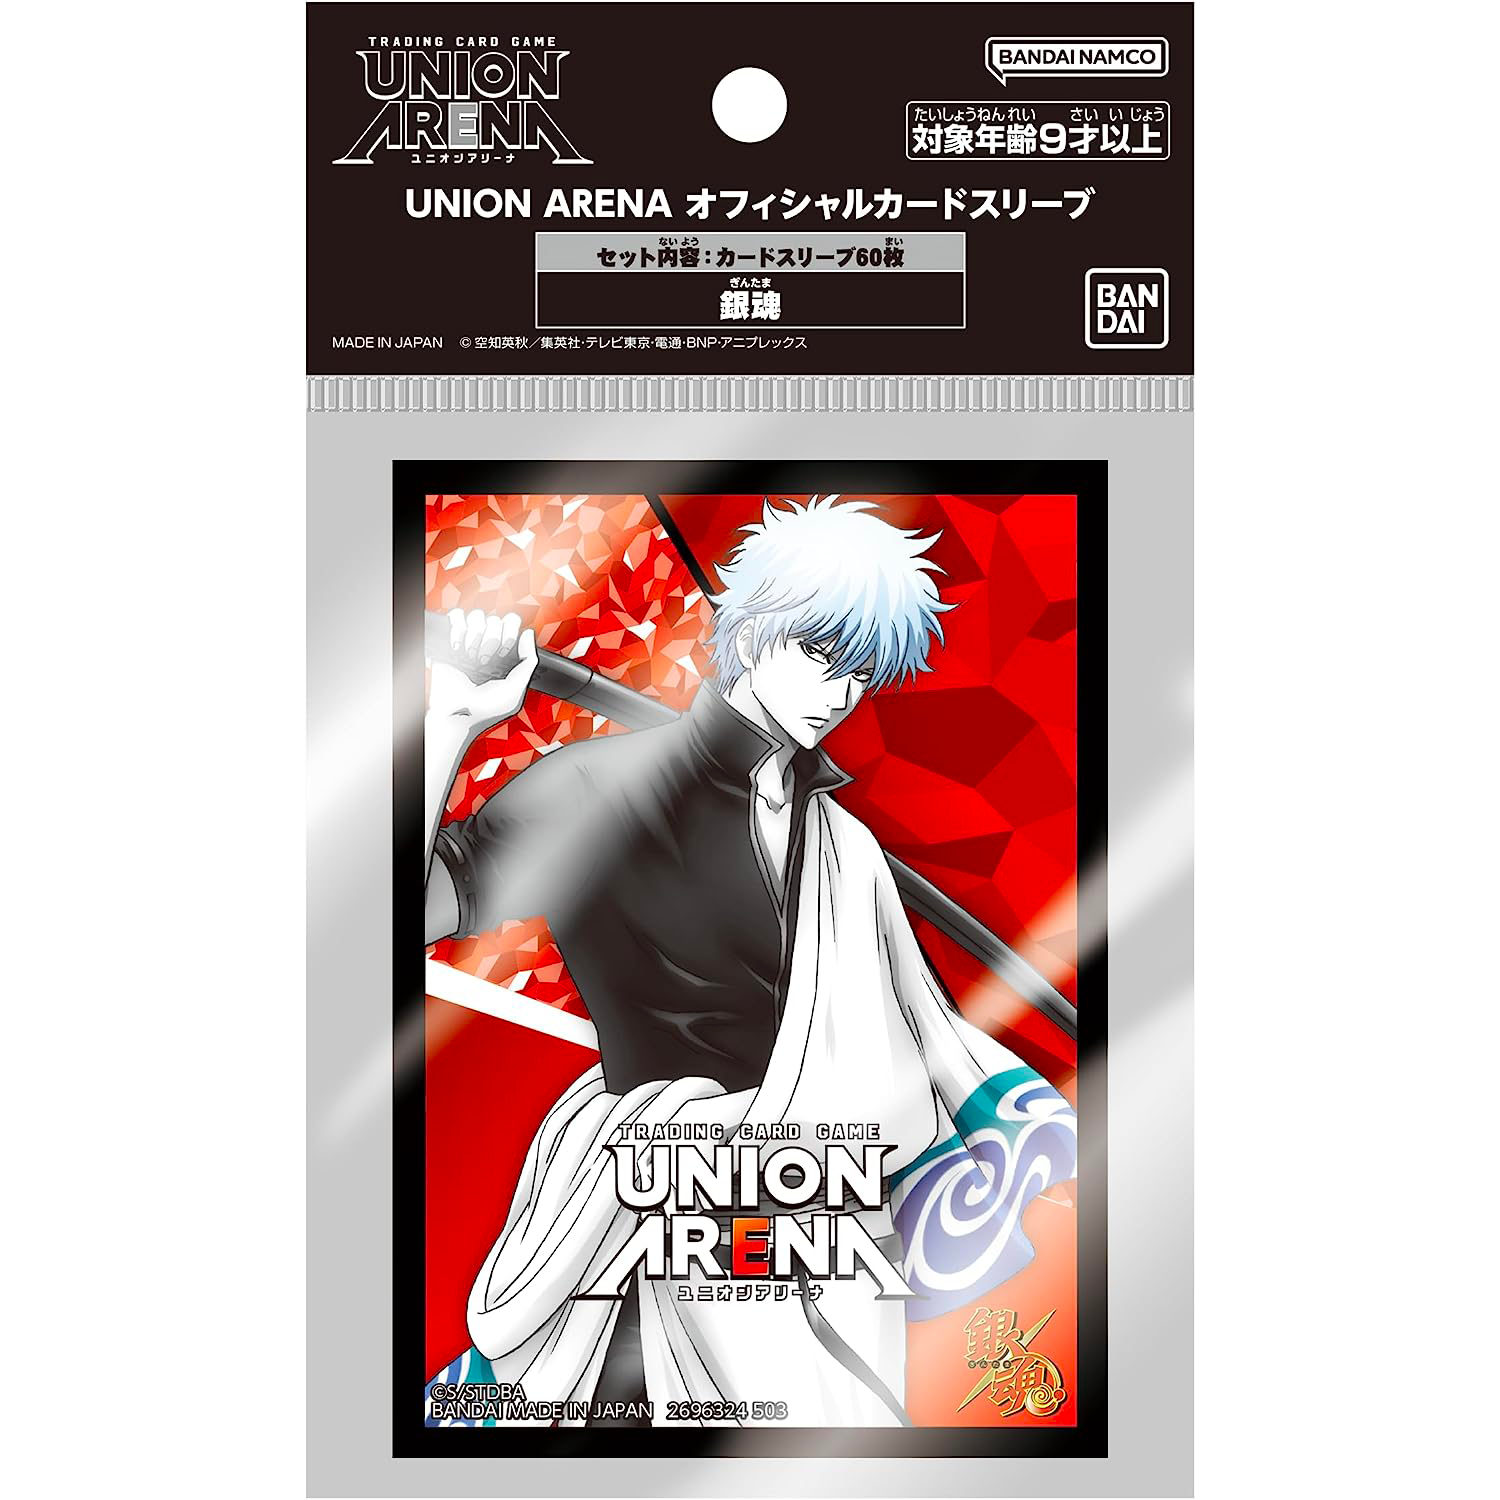 TRADING CARD GAME UNION ARENA Official Card Sleeve Gintama